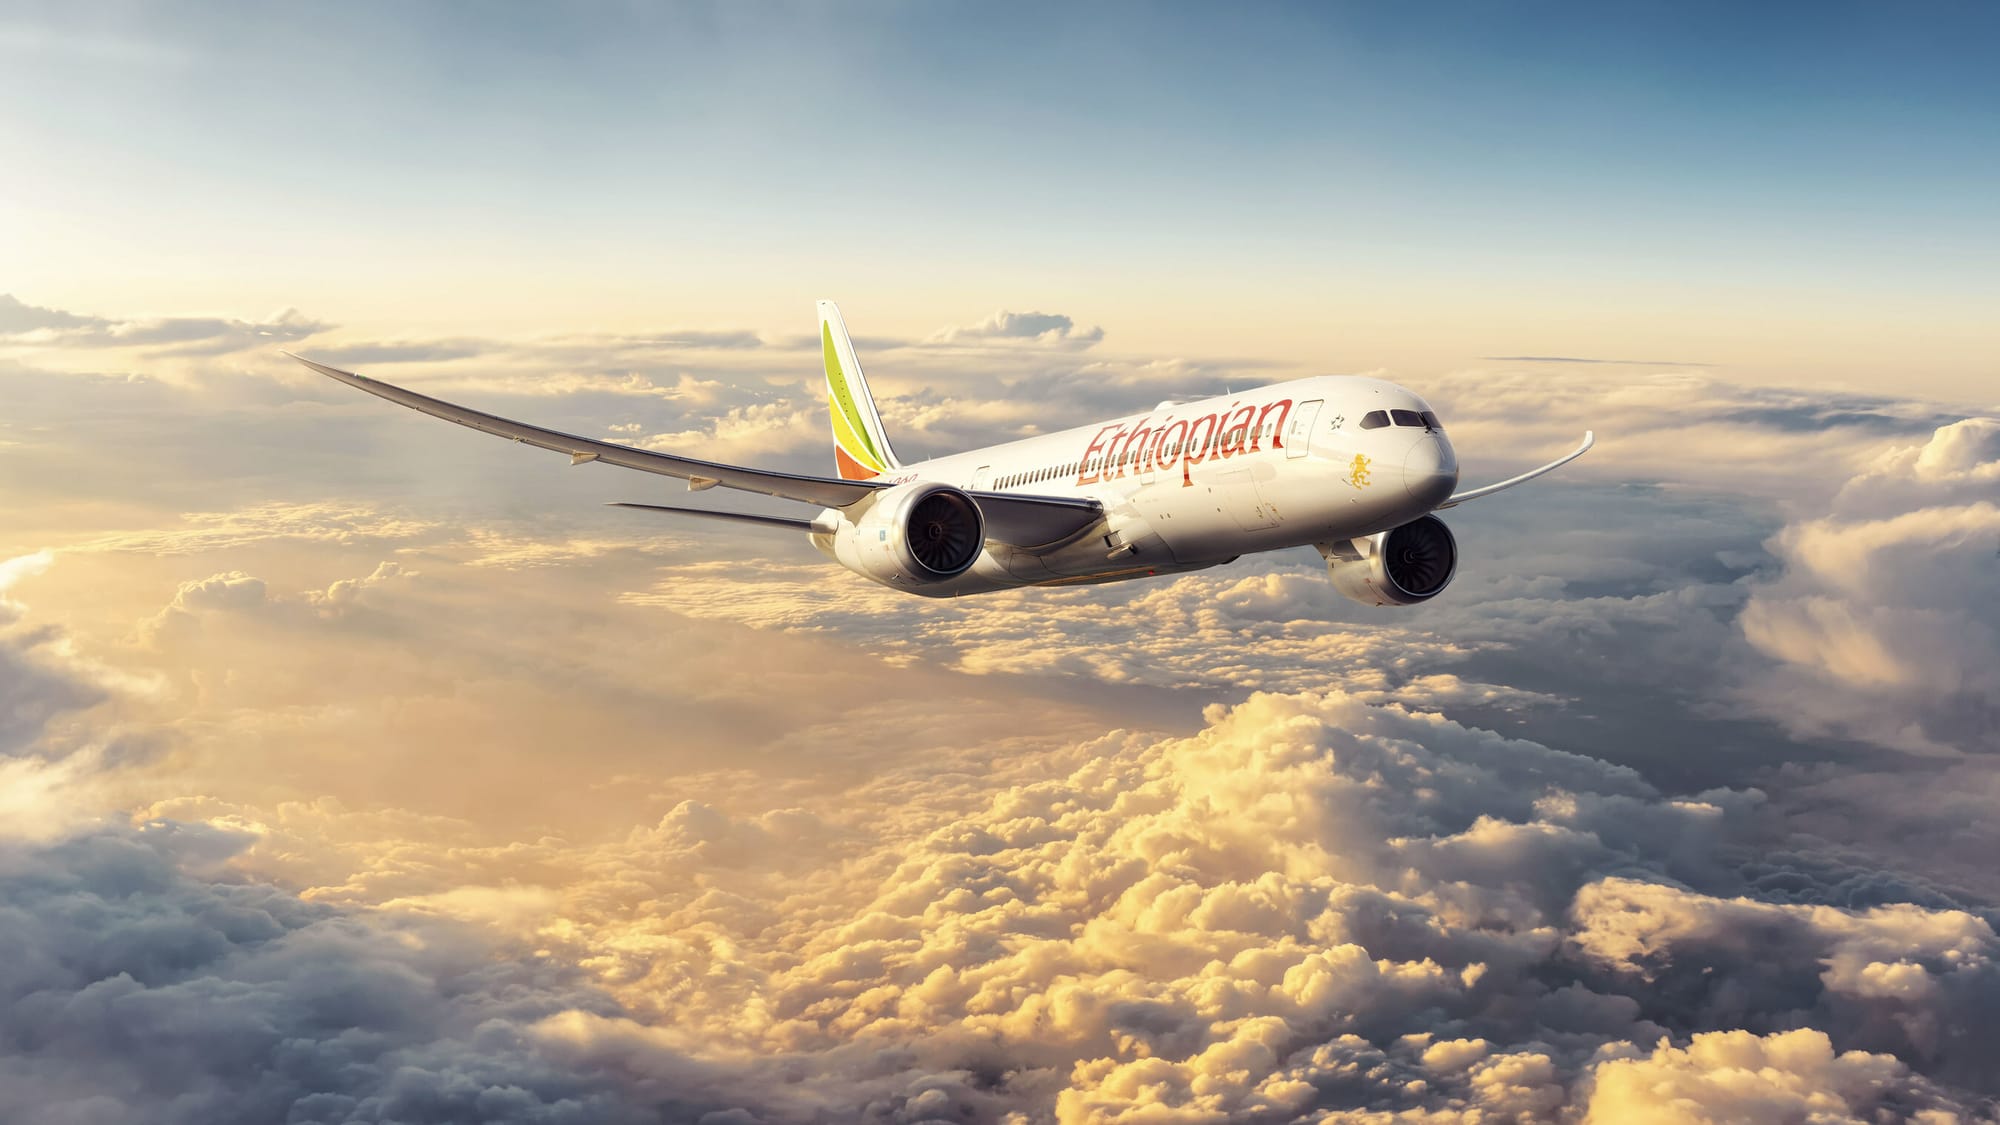 Ethiopian Airlines Secures a Significant $450 Million Loan from Citi for Fleet Expansion